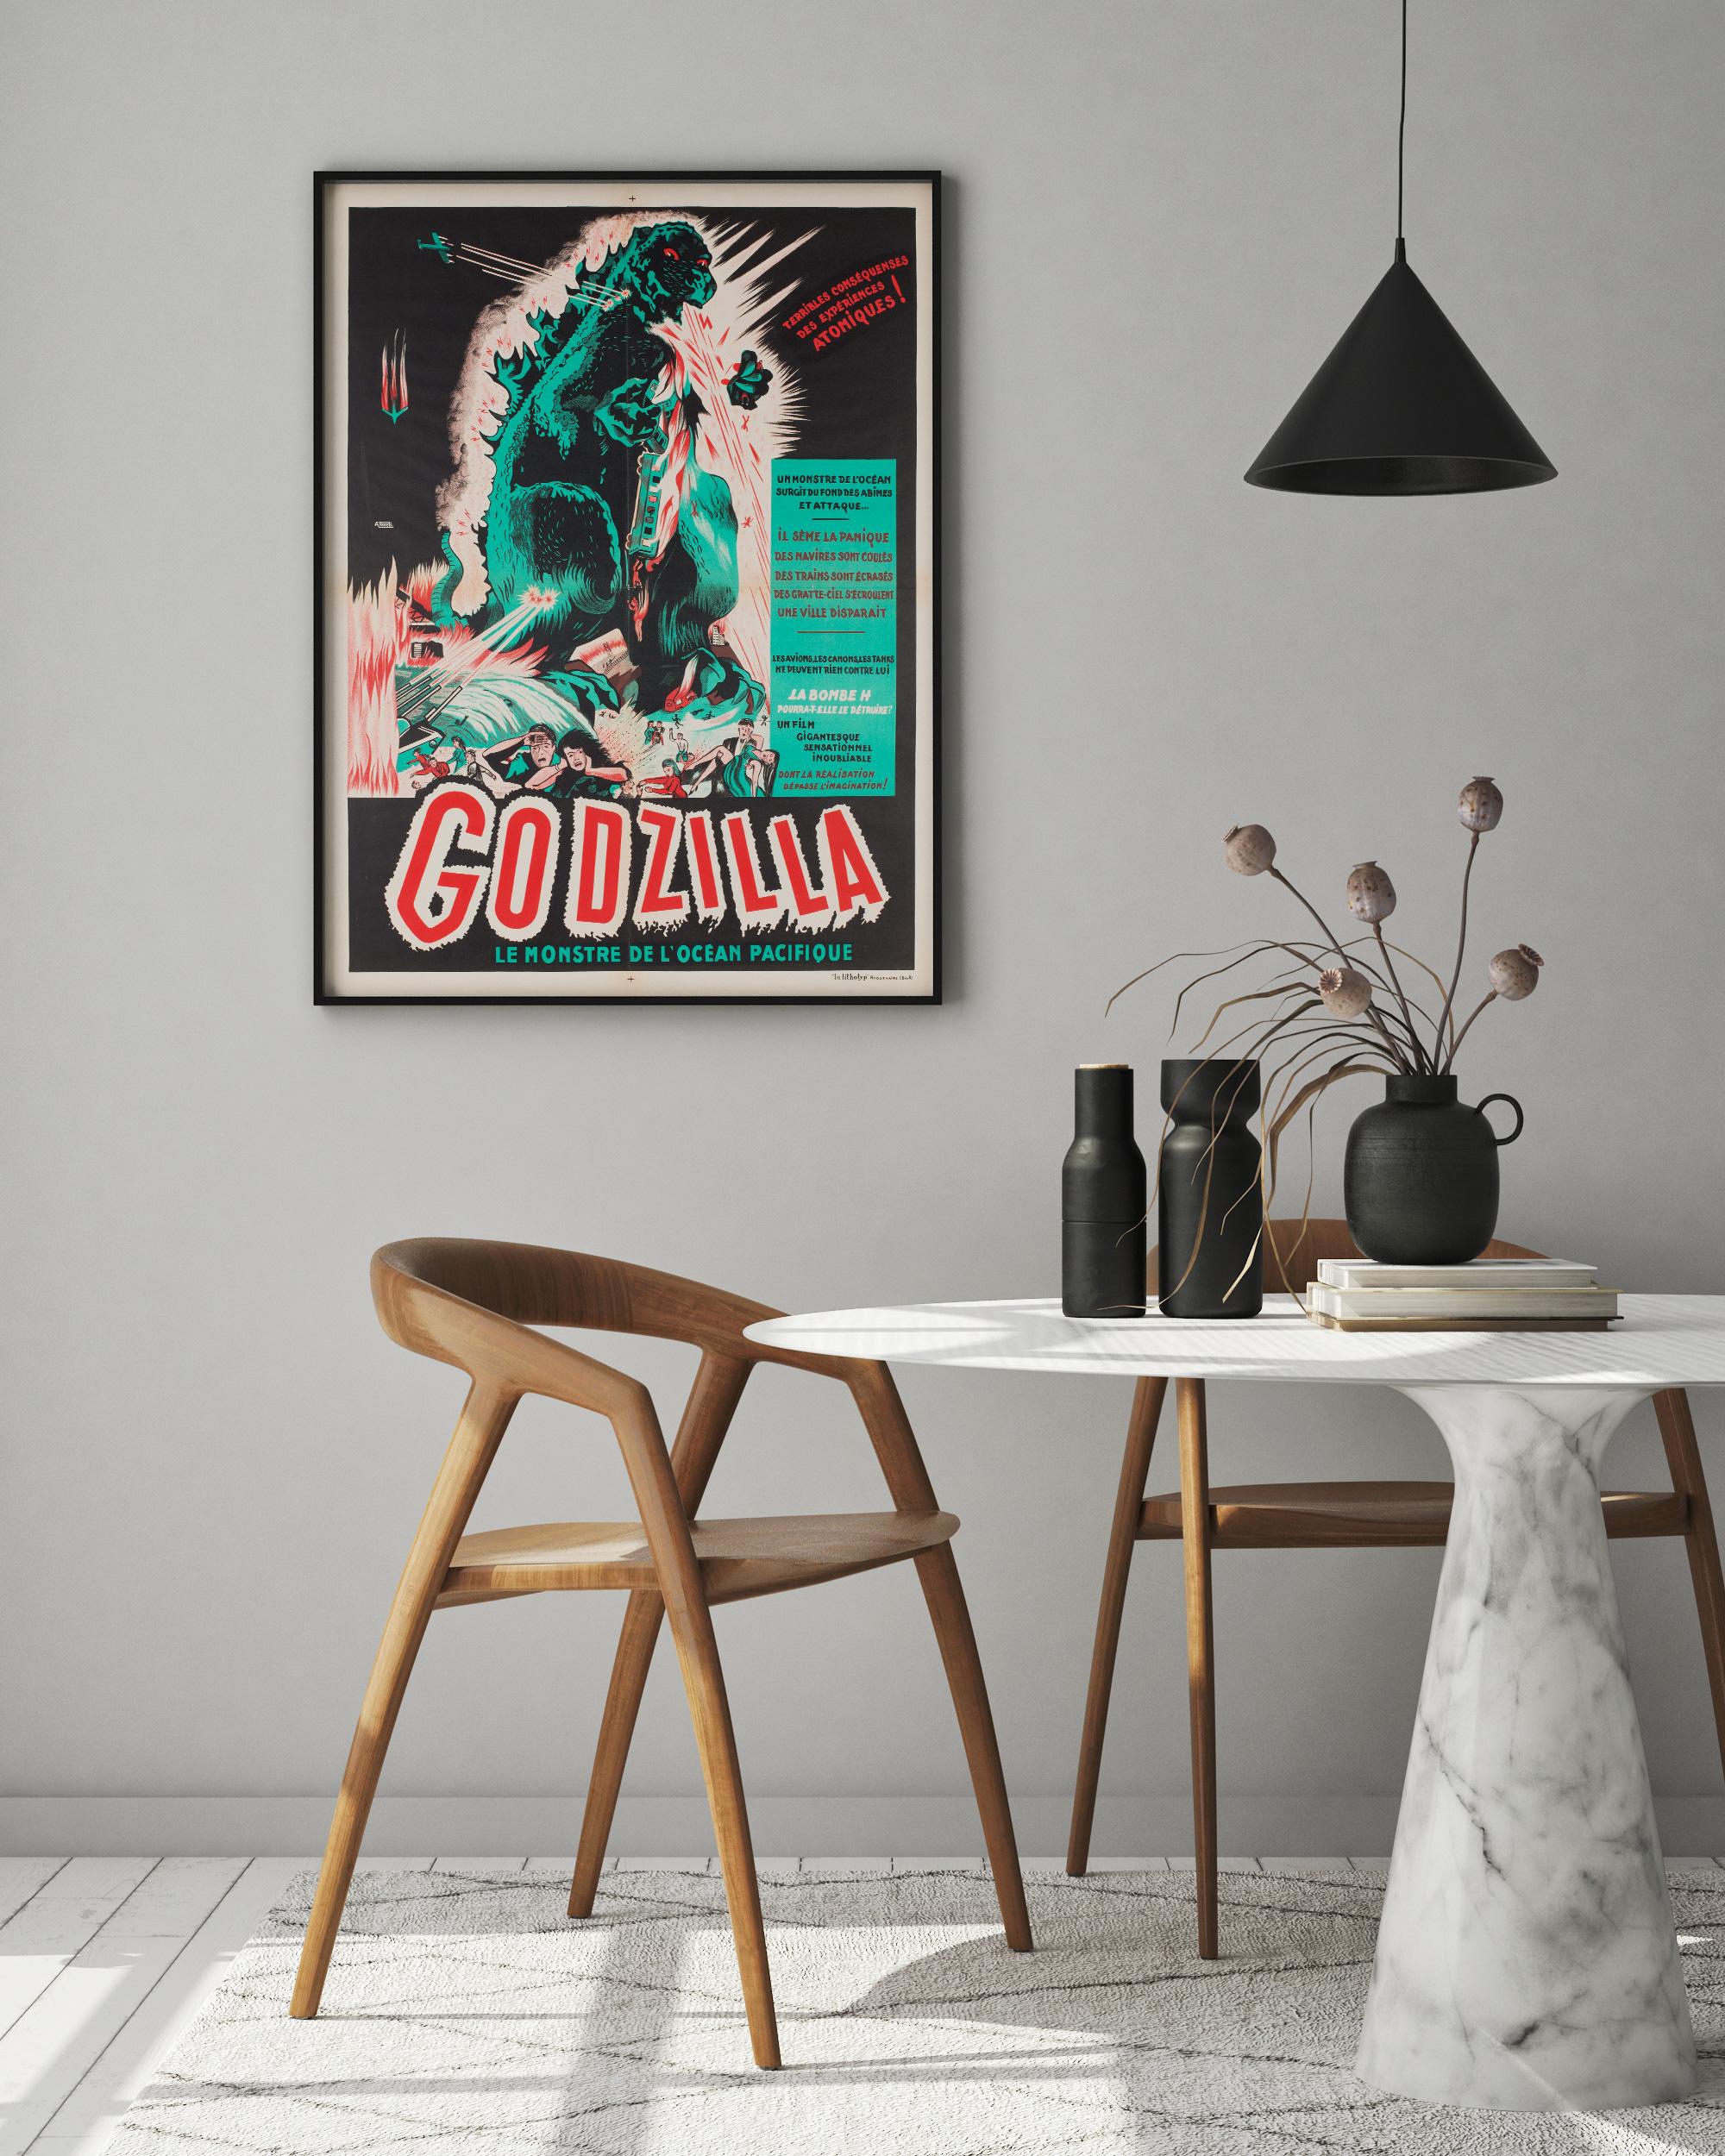 Rare and highly sought after late 1950s, French re-release for 1954s film Godzilla. Wonderful red, green, black and white graphics.

This original vintage movie poster is sized 23 6/8 x 31 3/8 inches.